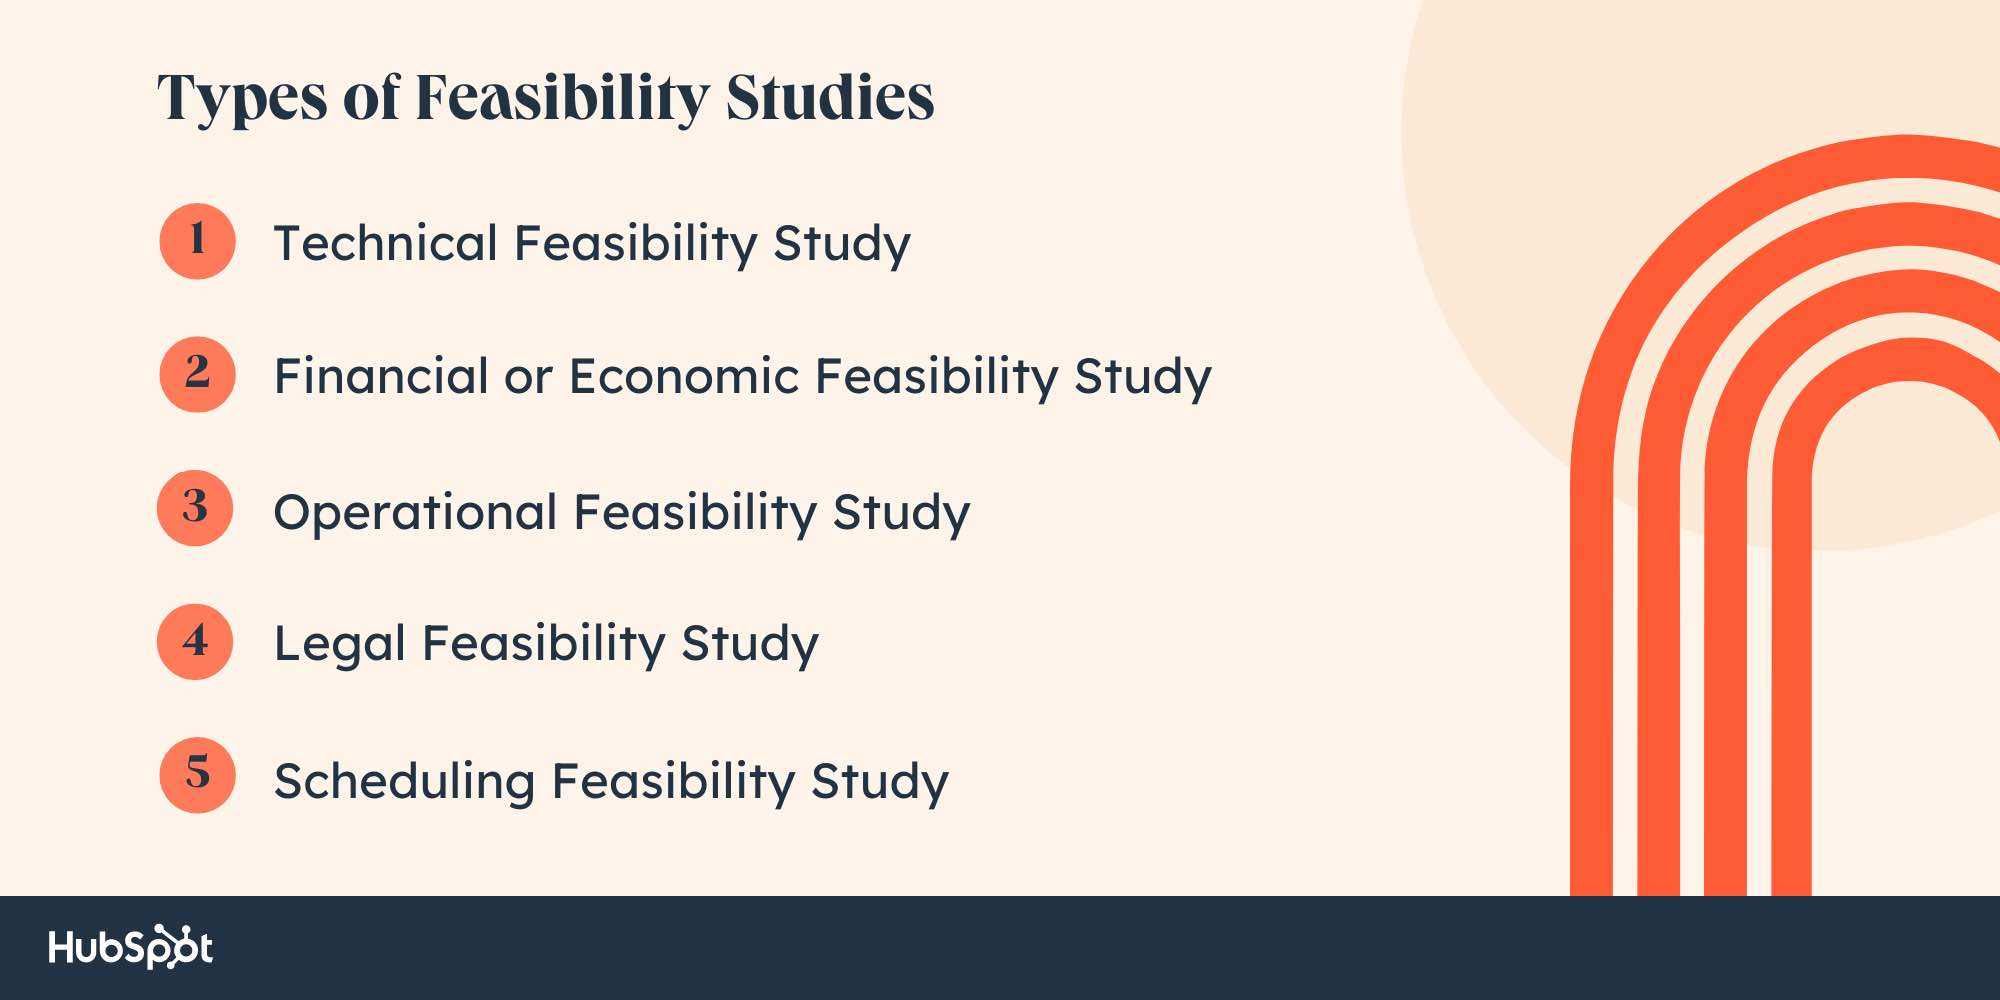 easibility study types, technical feasibility study, financial or economic feasibility study, operational feasibility study, legal feasibility study, scheduling feasibility study